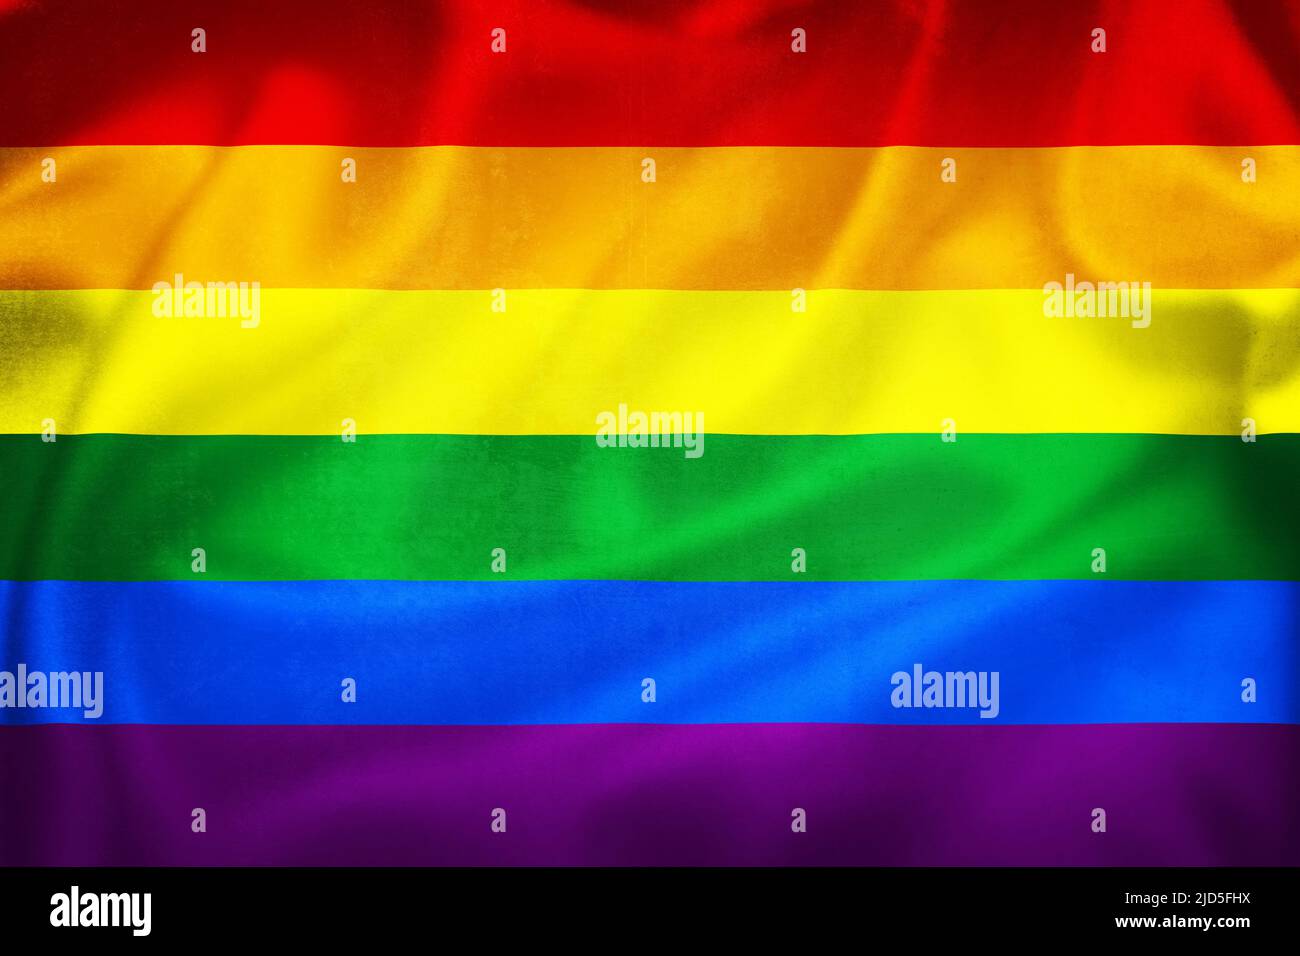 LGBTQ pride rainbow grunge flag 3D illustration, symbol of lesbian, gay, bisexual, transgender and queer pride and LGBT social movements Stock Photo